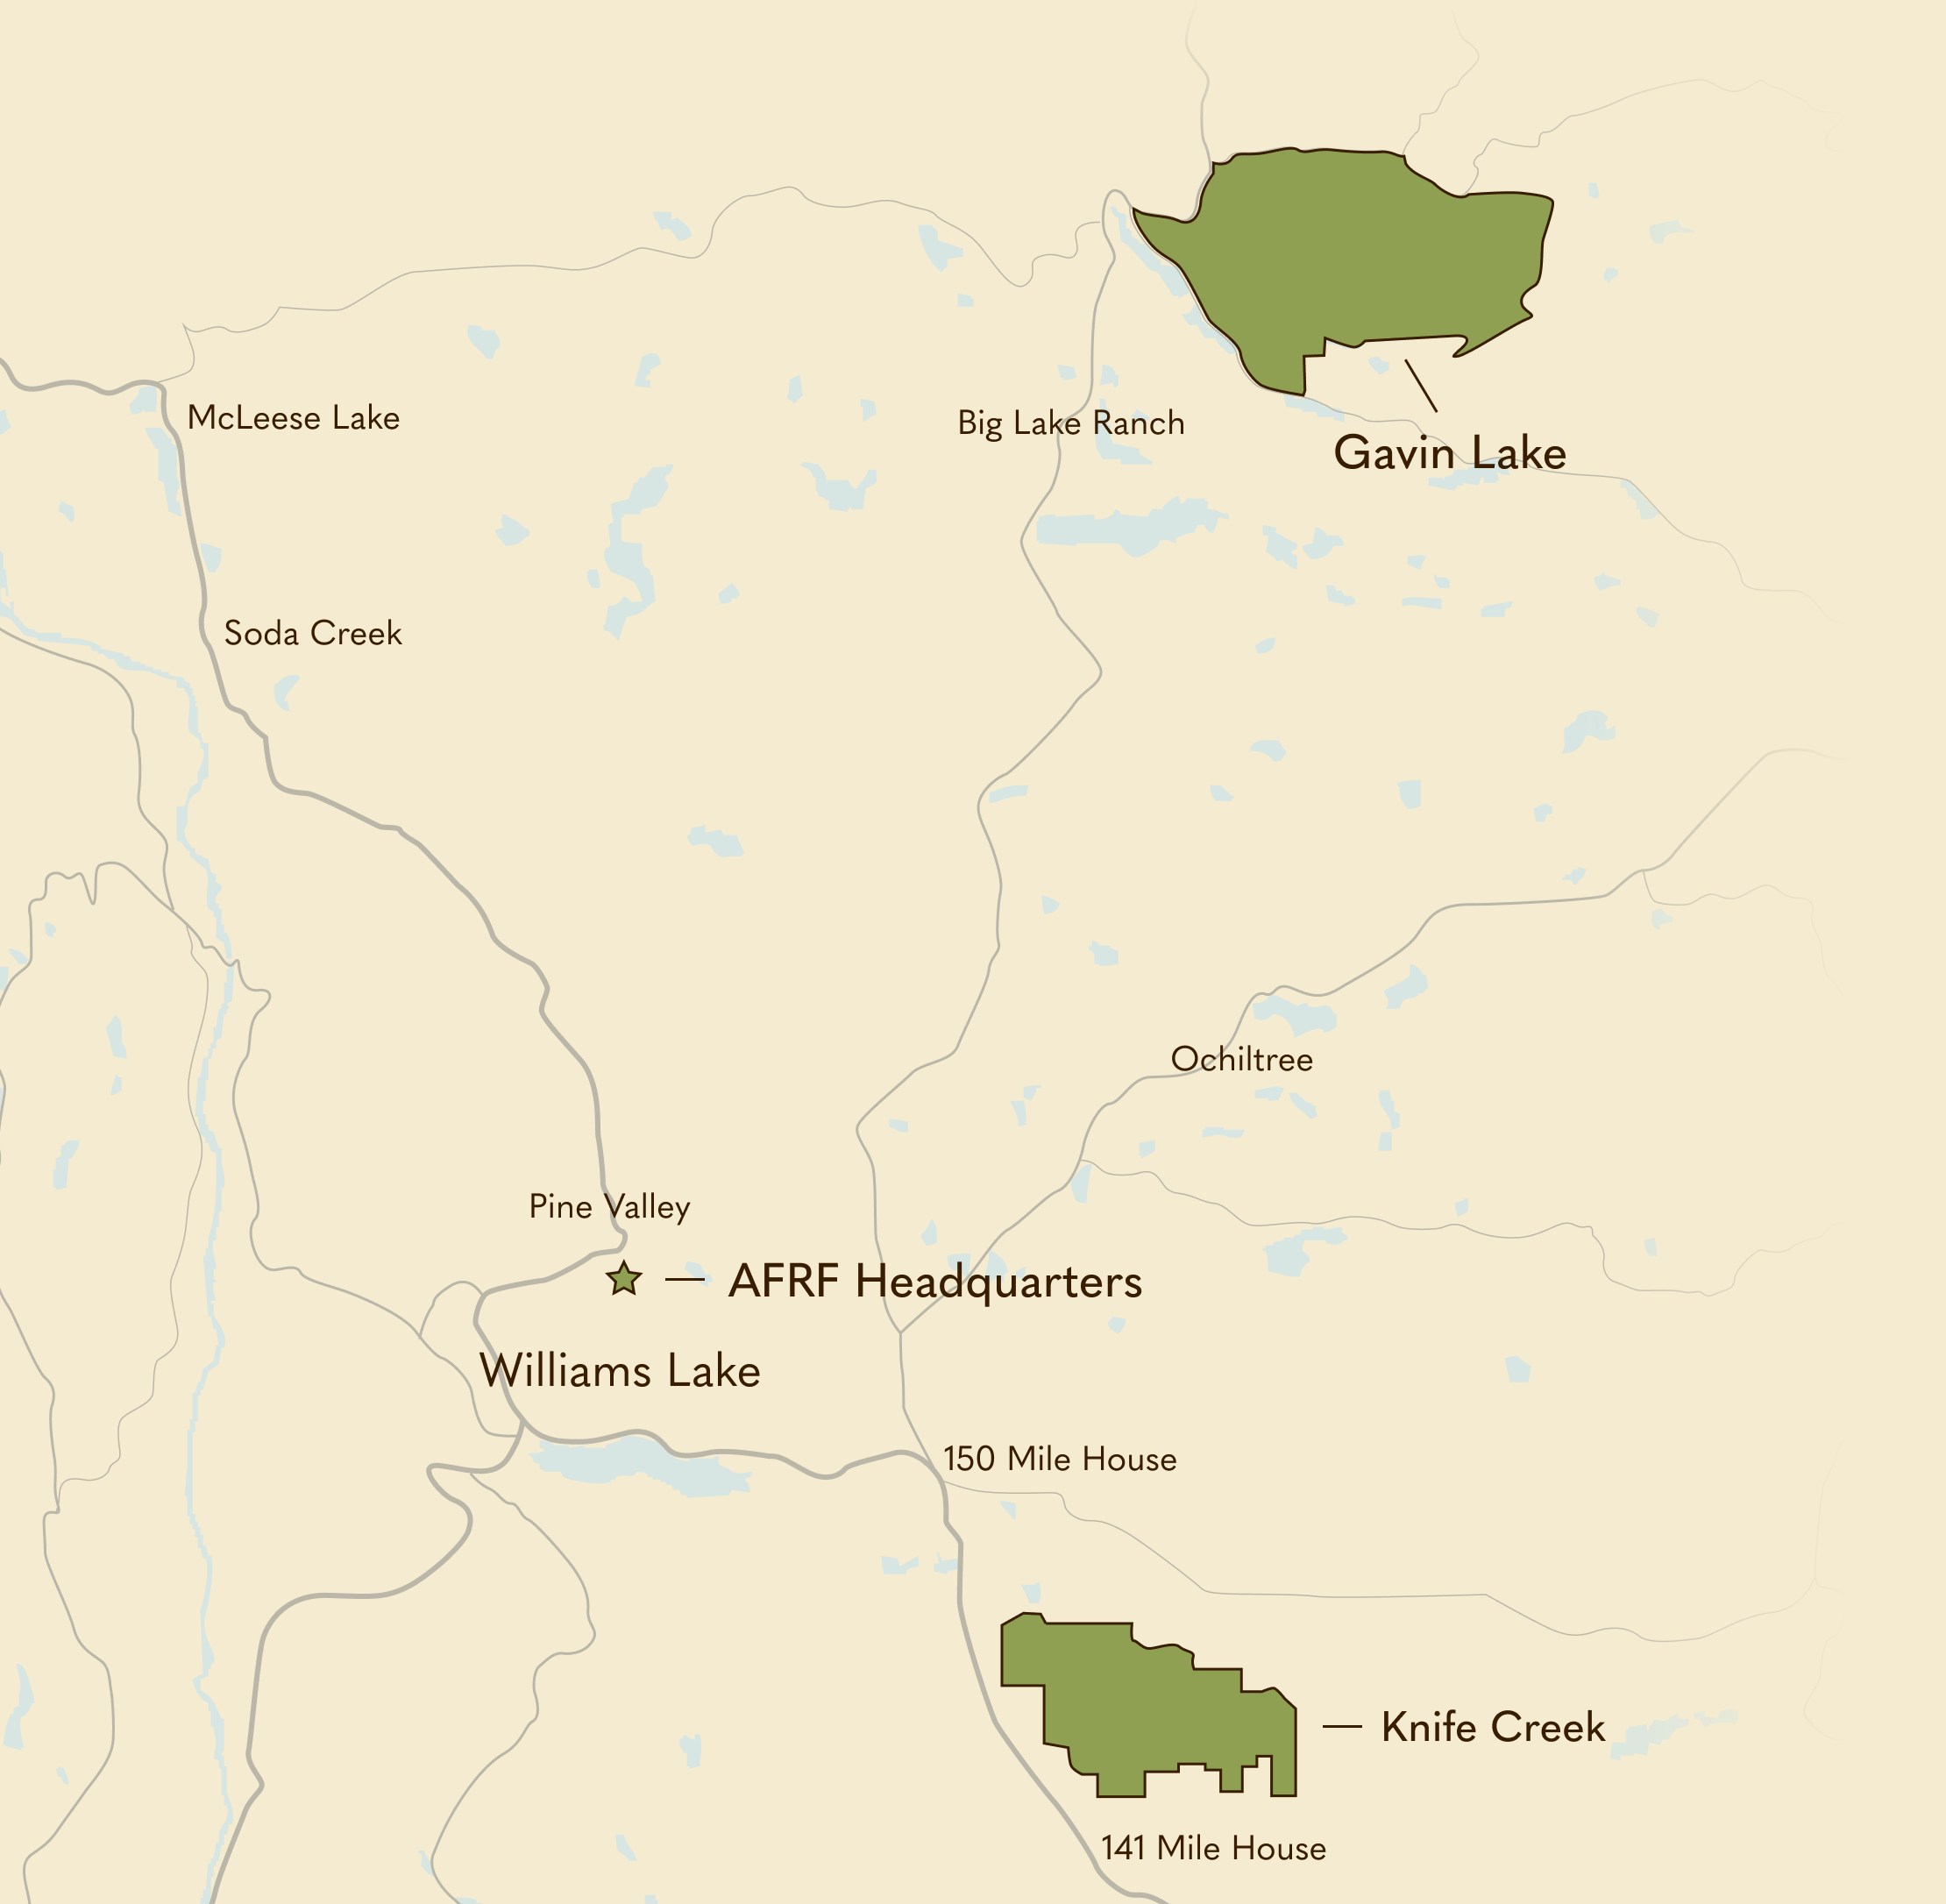 Map of where Gavin Lake, Knife Creek, and Alex Fraser Research Forest are located in relation to Williams Lake